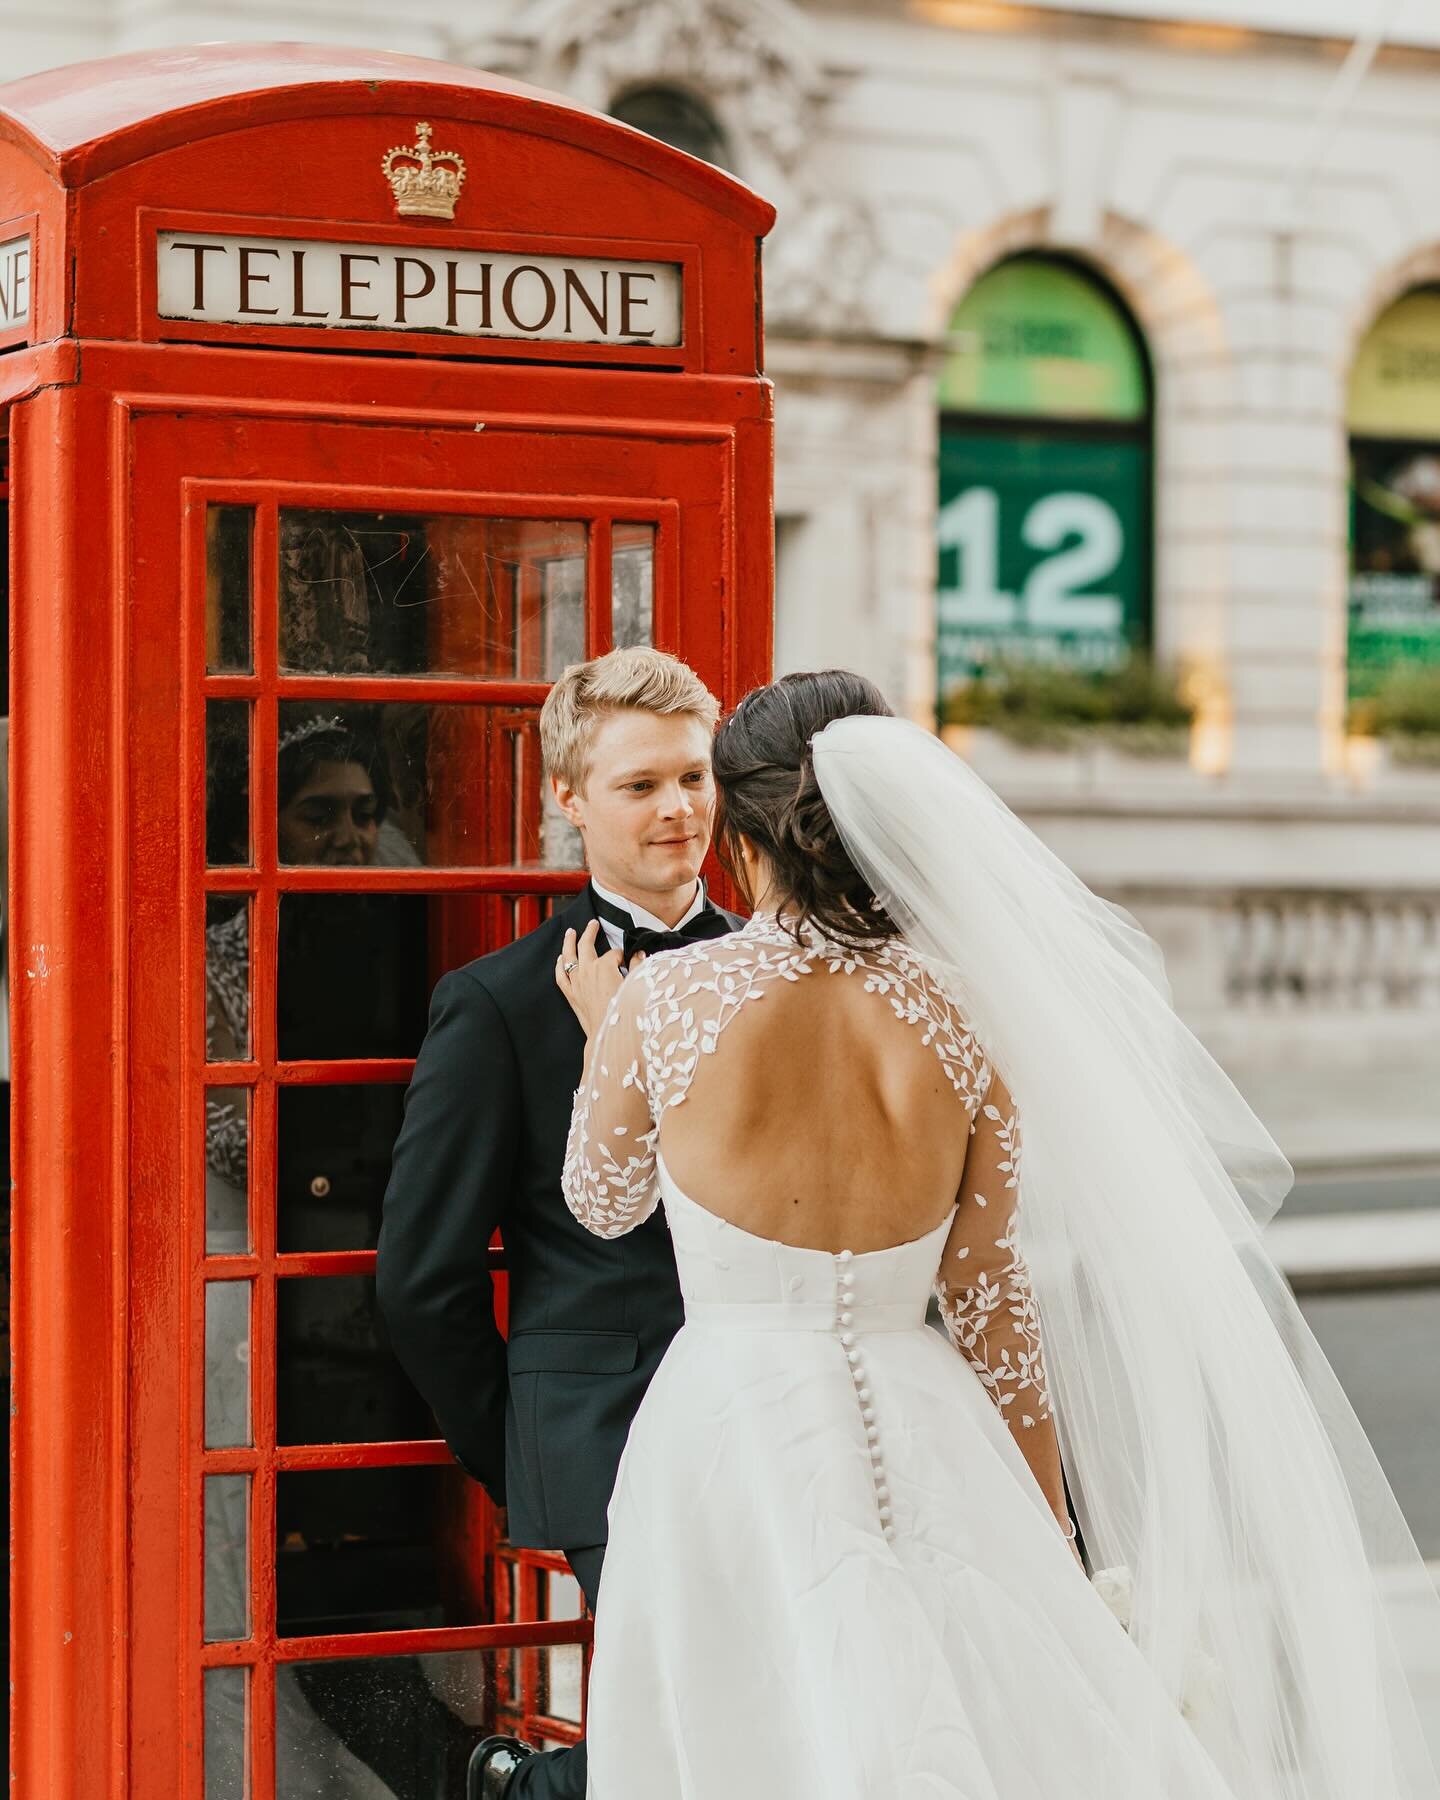 Hey there! I'm curious, where would you love to tie the knot? Are you dreaming of a romantic London City wedding, a rustic barn wedding, a fairy tale castle wedding, or perhaps a breezy beach wedding? Or maybe you're thinking of a destination wedding